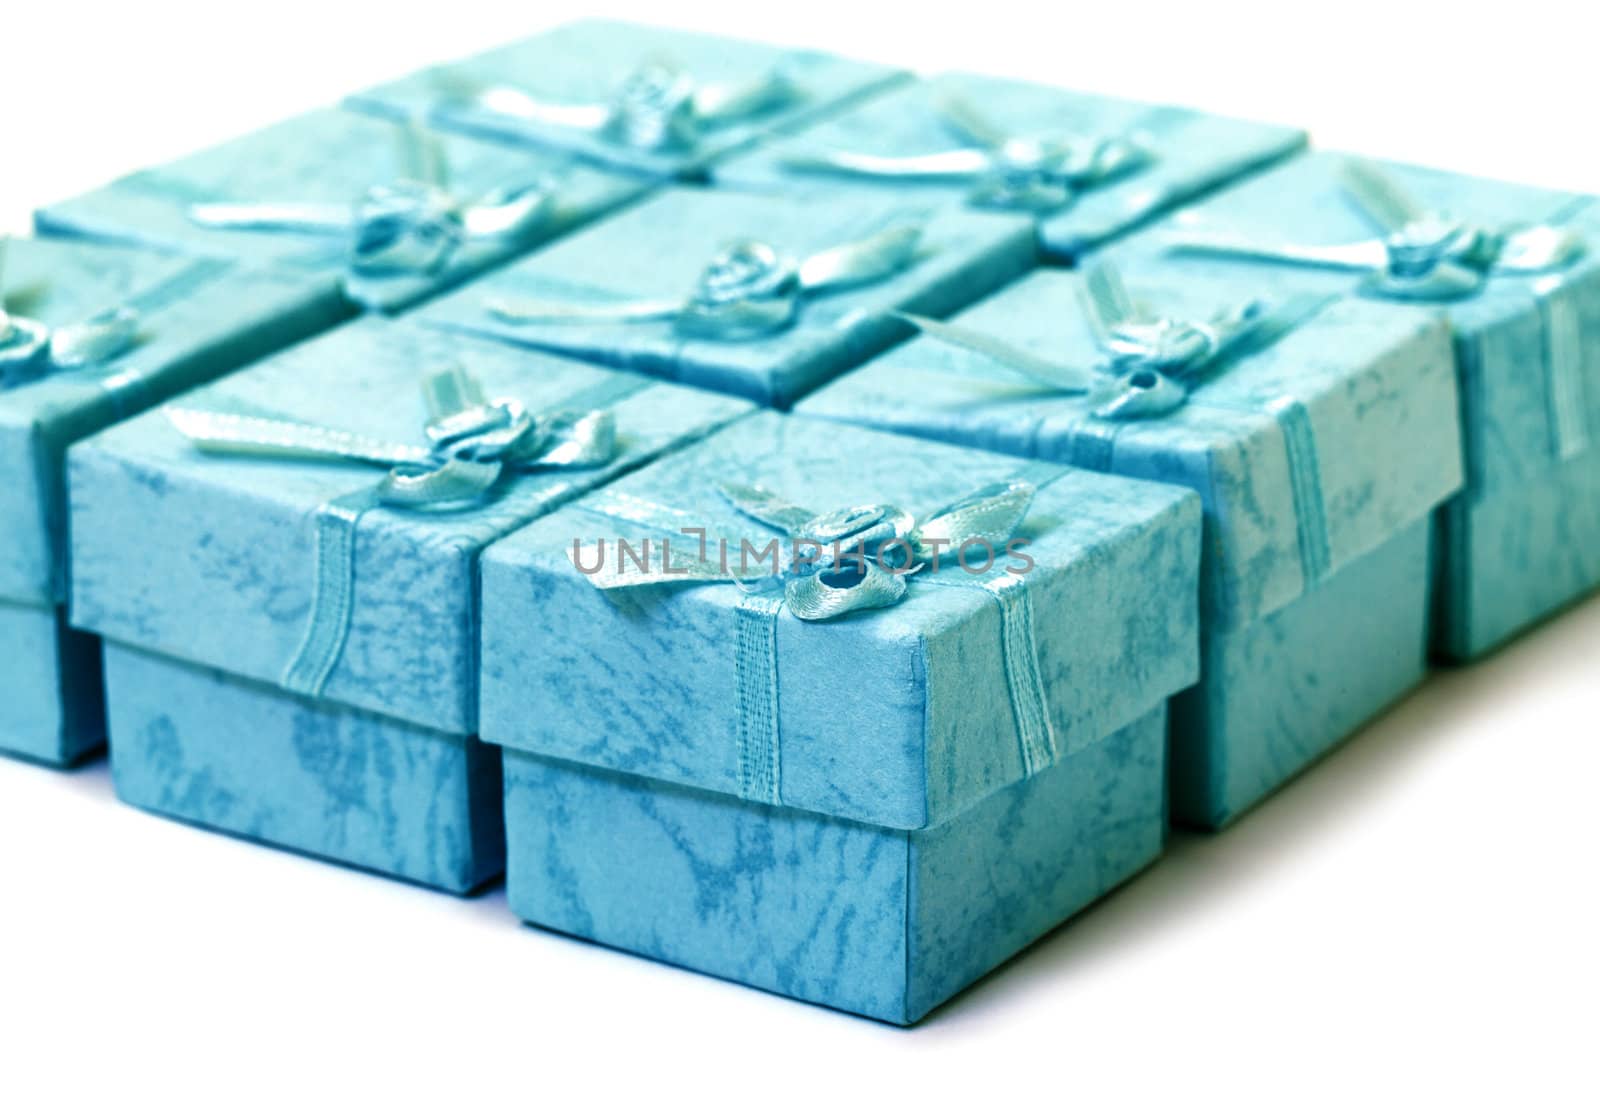 Cyan gift boxes closeup on white background